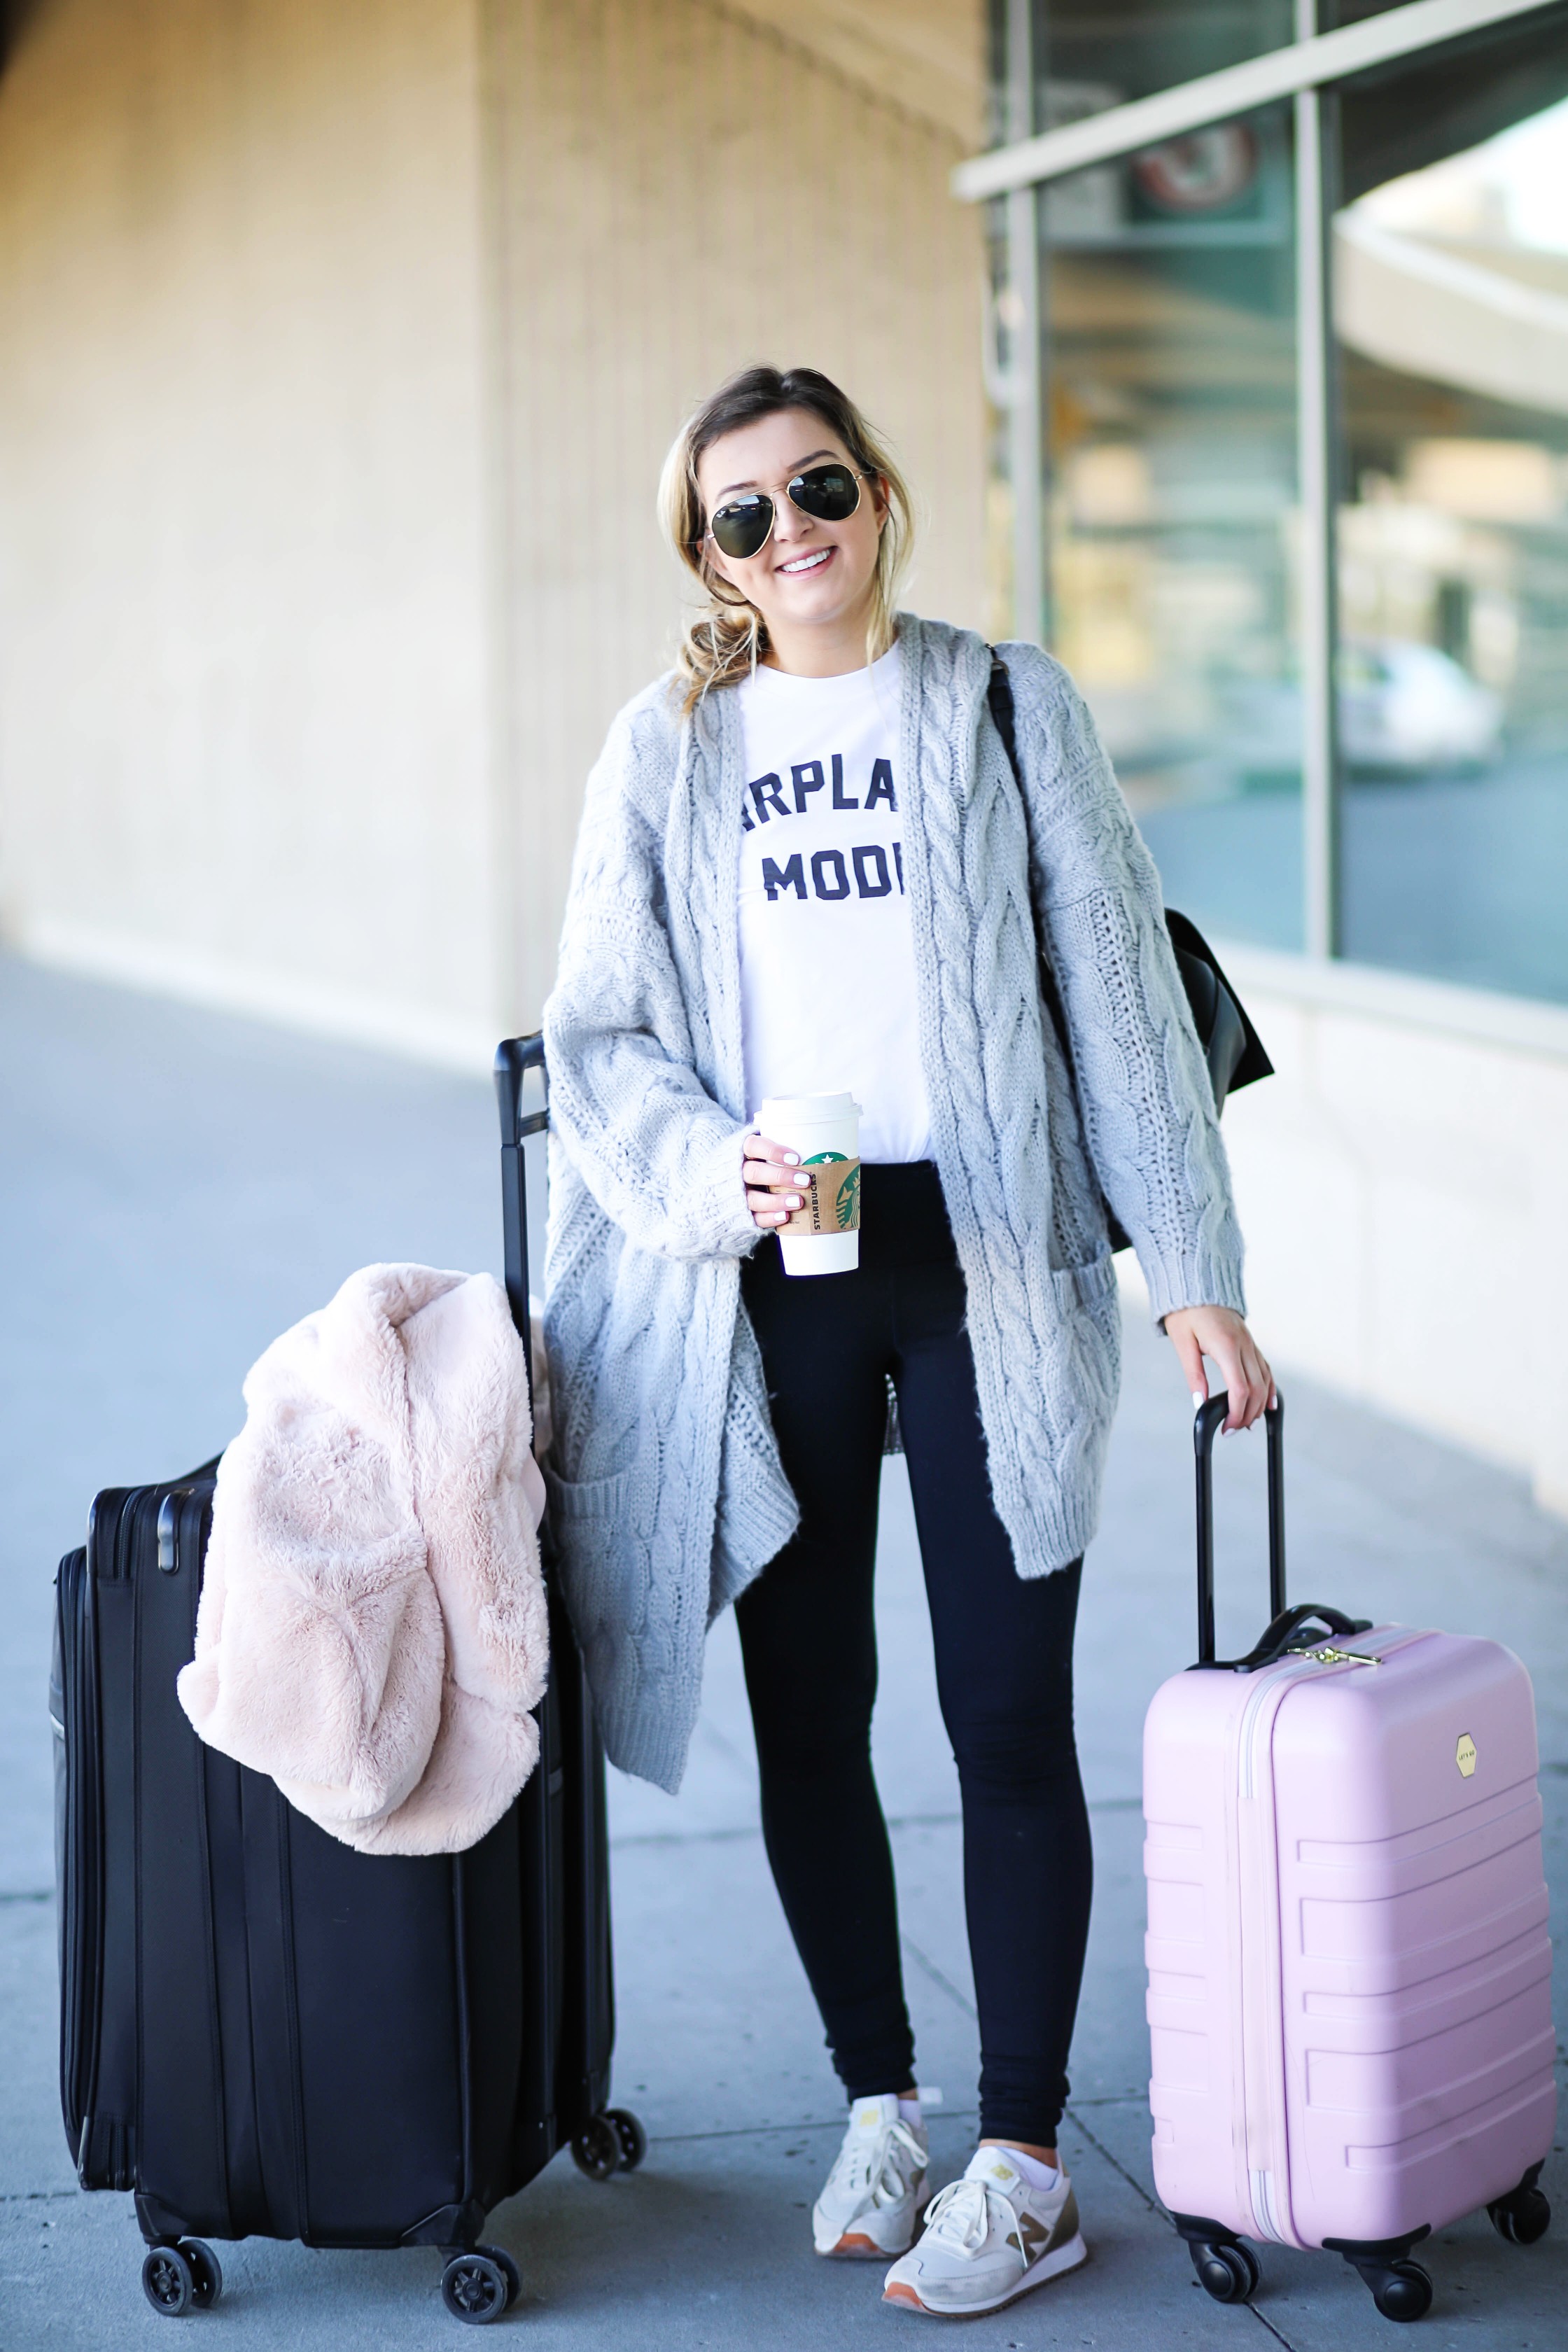 “Airplane Mode” Cute Airplane Outfits | Travel OOTD + Ideas – Lauren ...